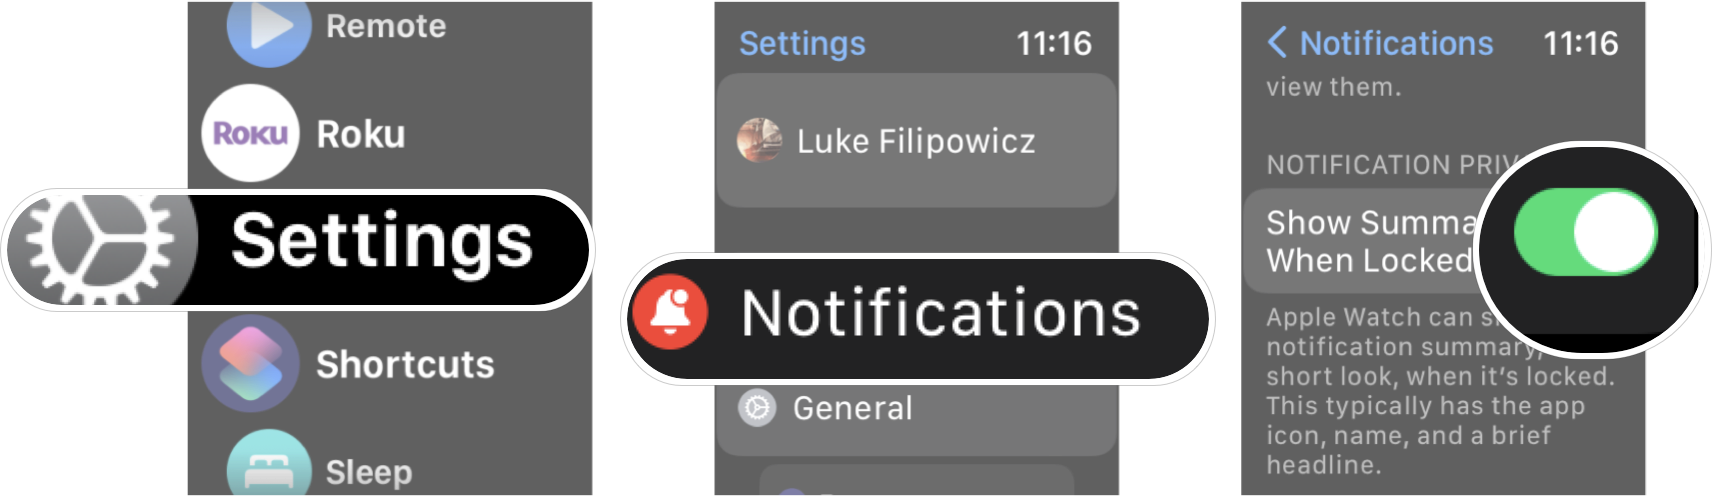 Turning Off Show Summary When Lock In Watchos 8: Launch Settings, Tap otifications, and then tap the Show Summary When Locked On/Off switch.